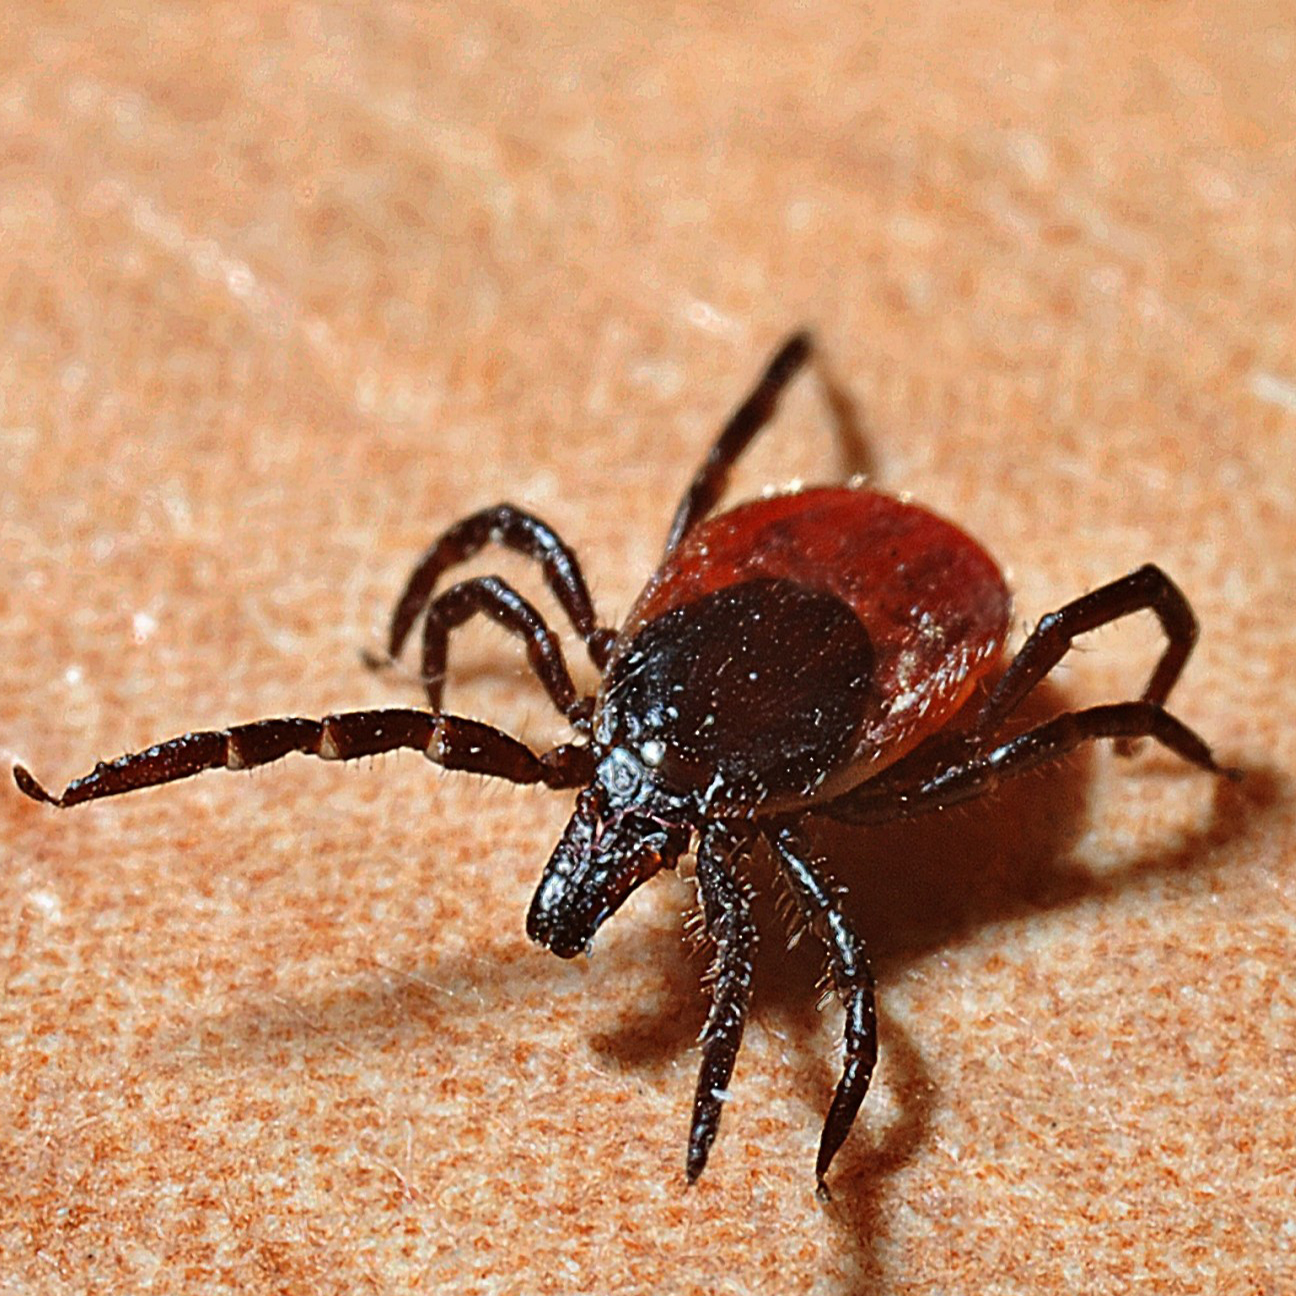 Protecting Yourself from Ticks and Tick Diseases